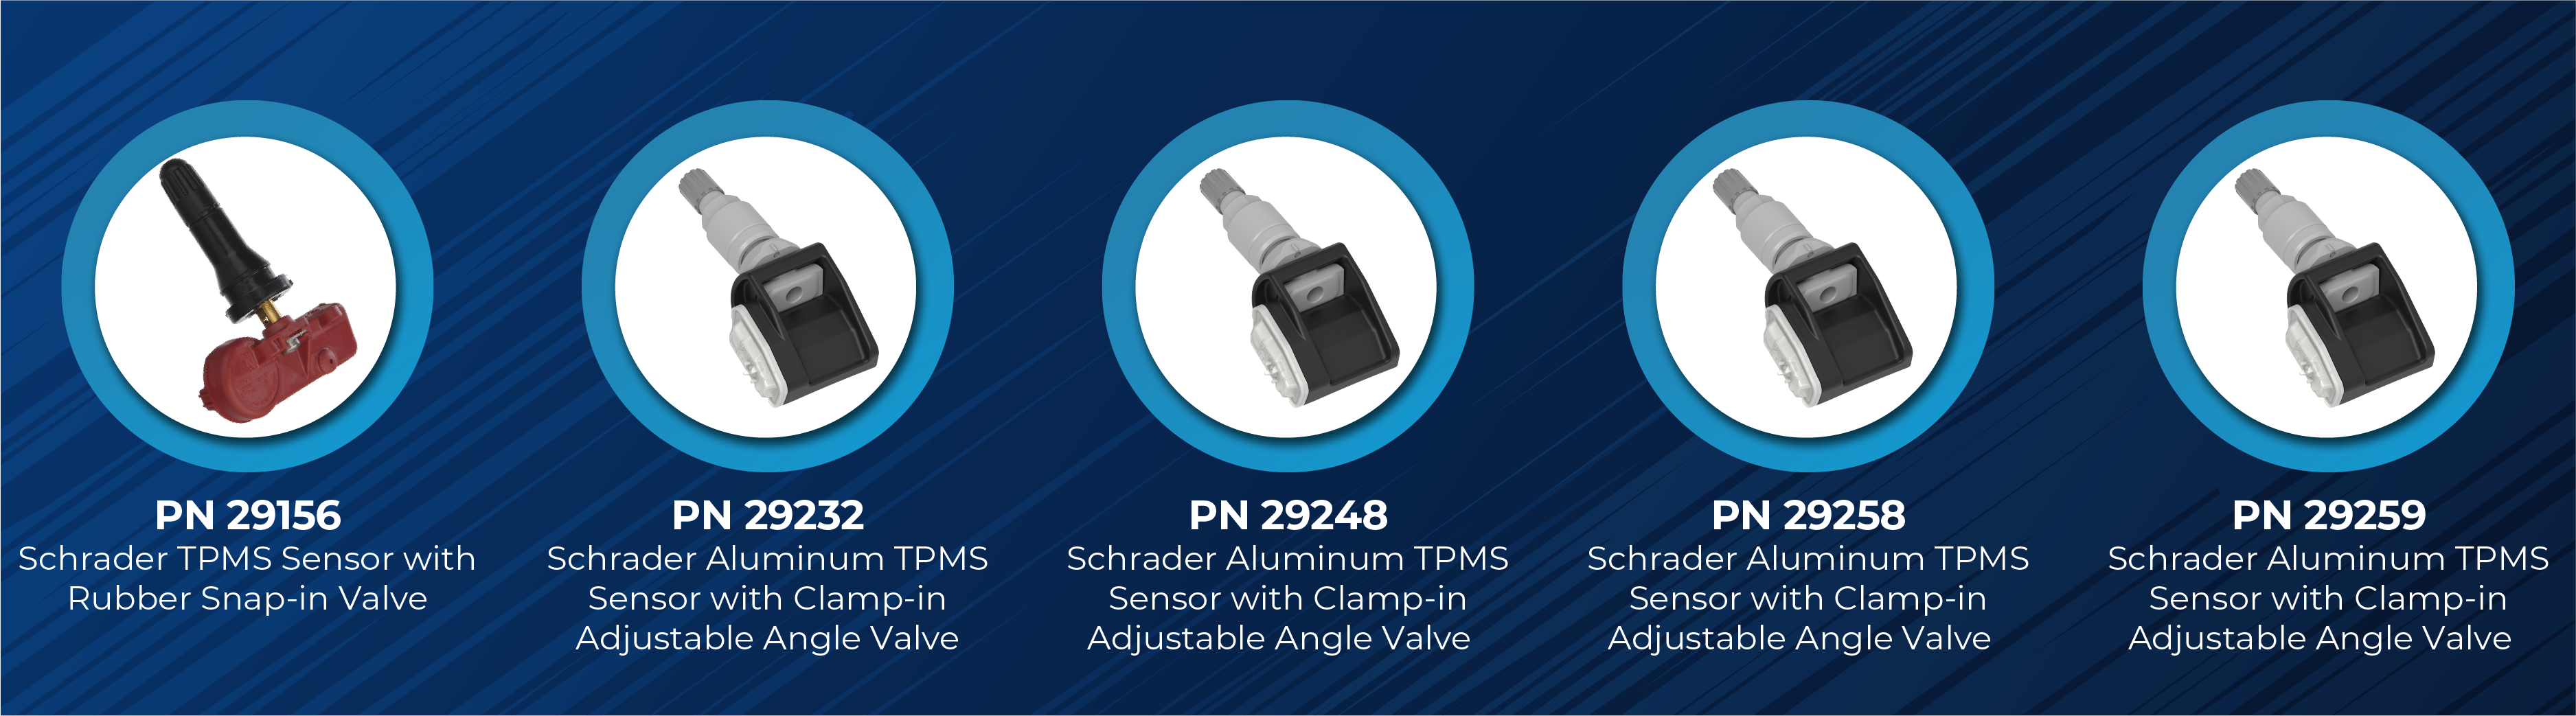 Schrader launches 5 new OER sensors